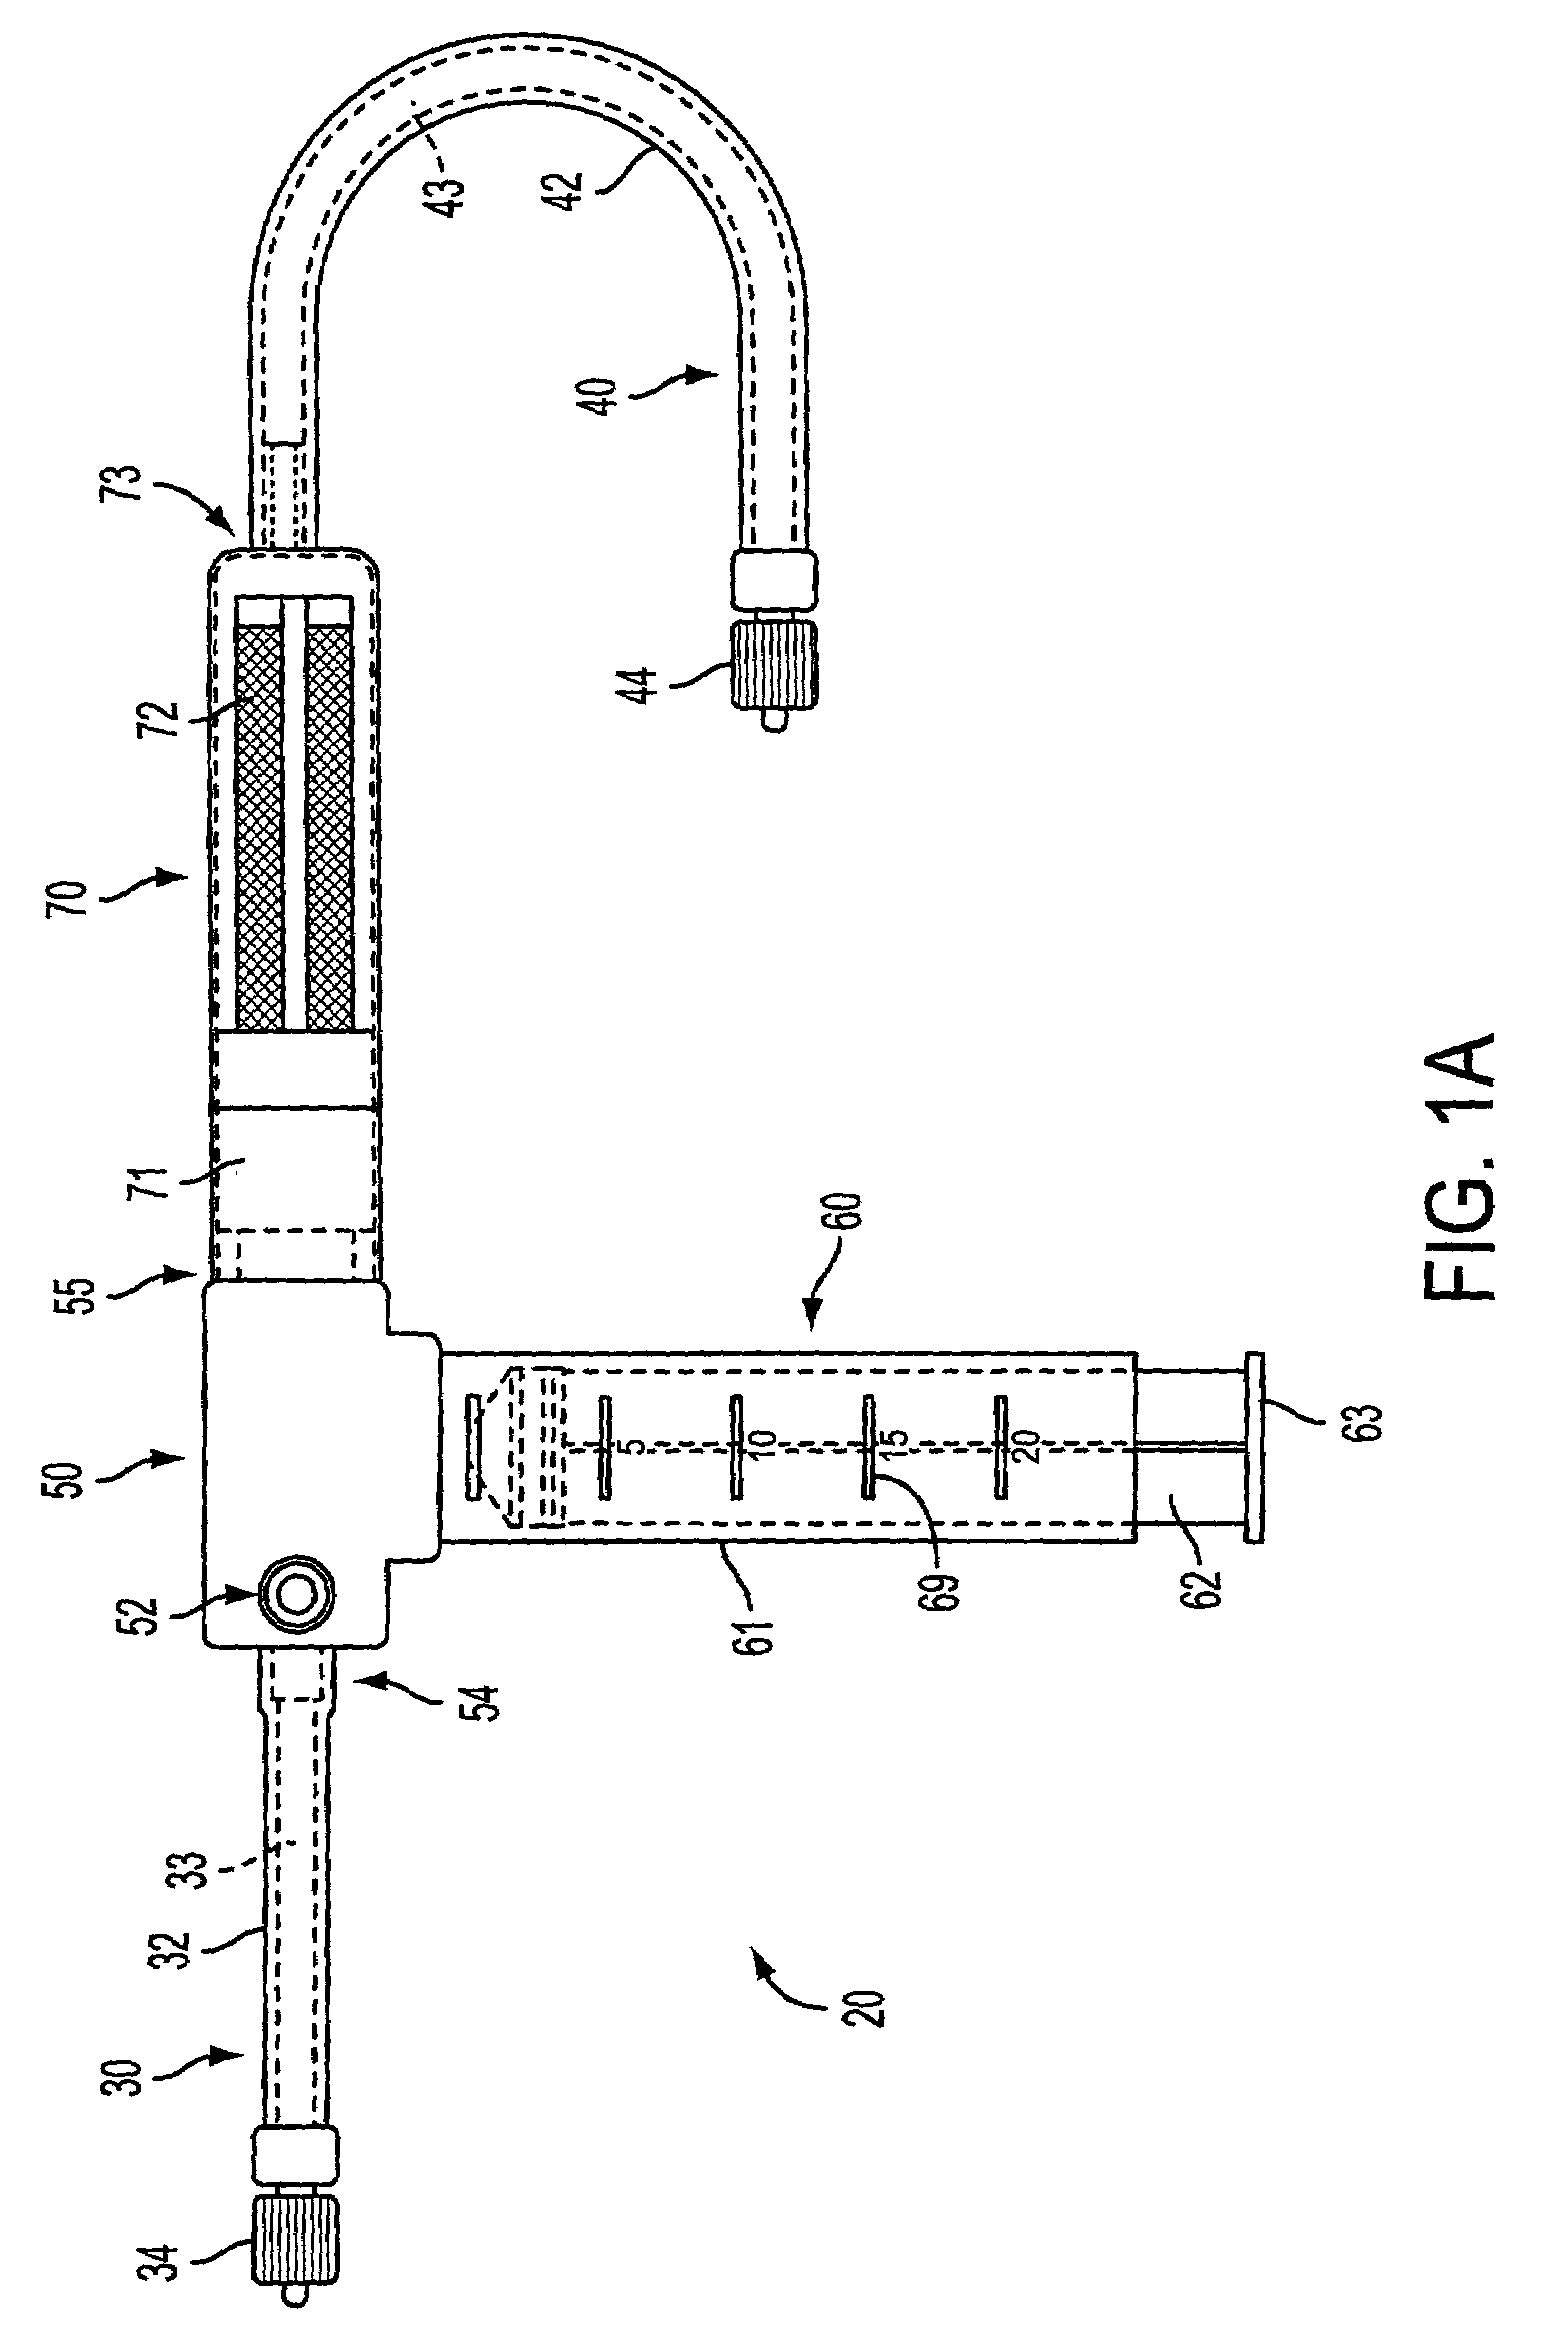 Blood aspiration system and methods of use